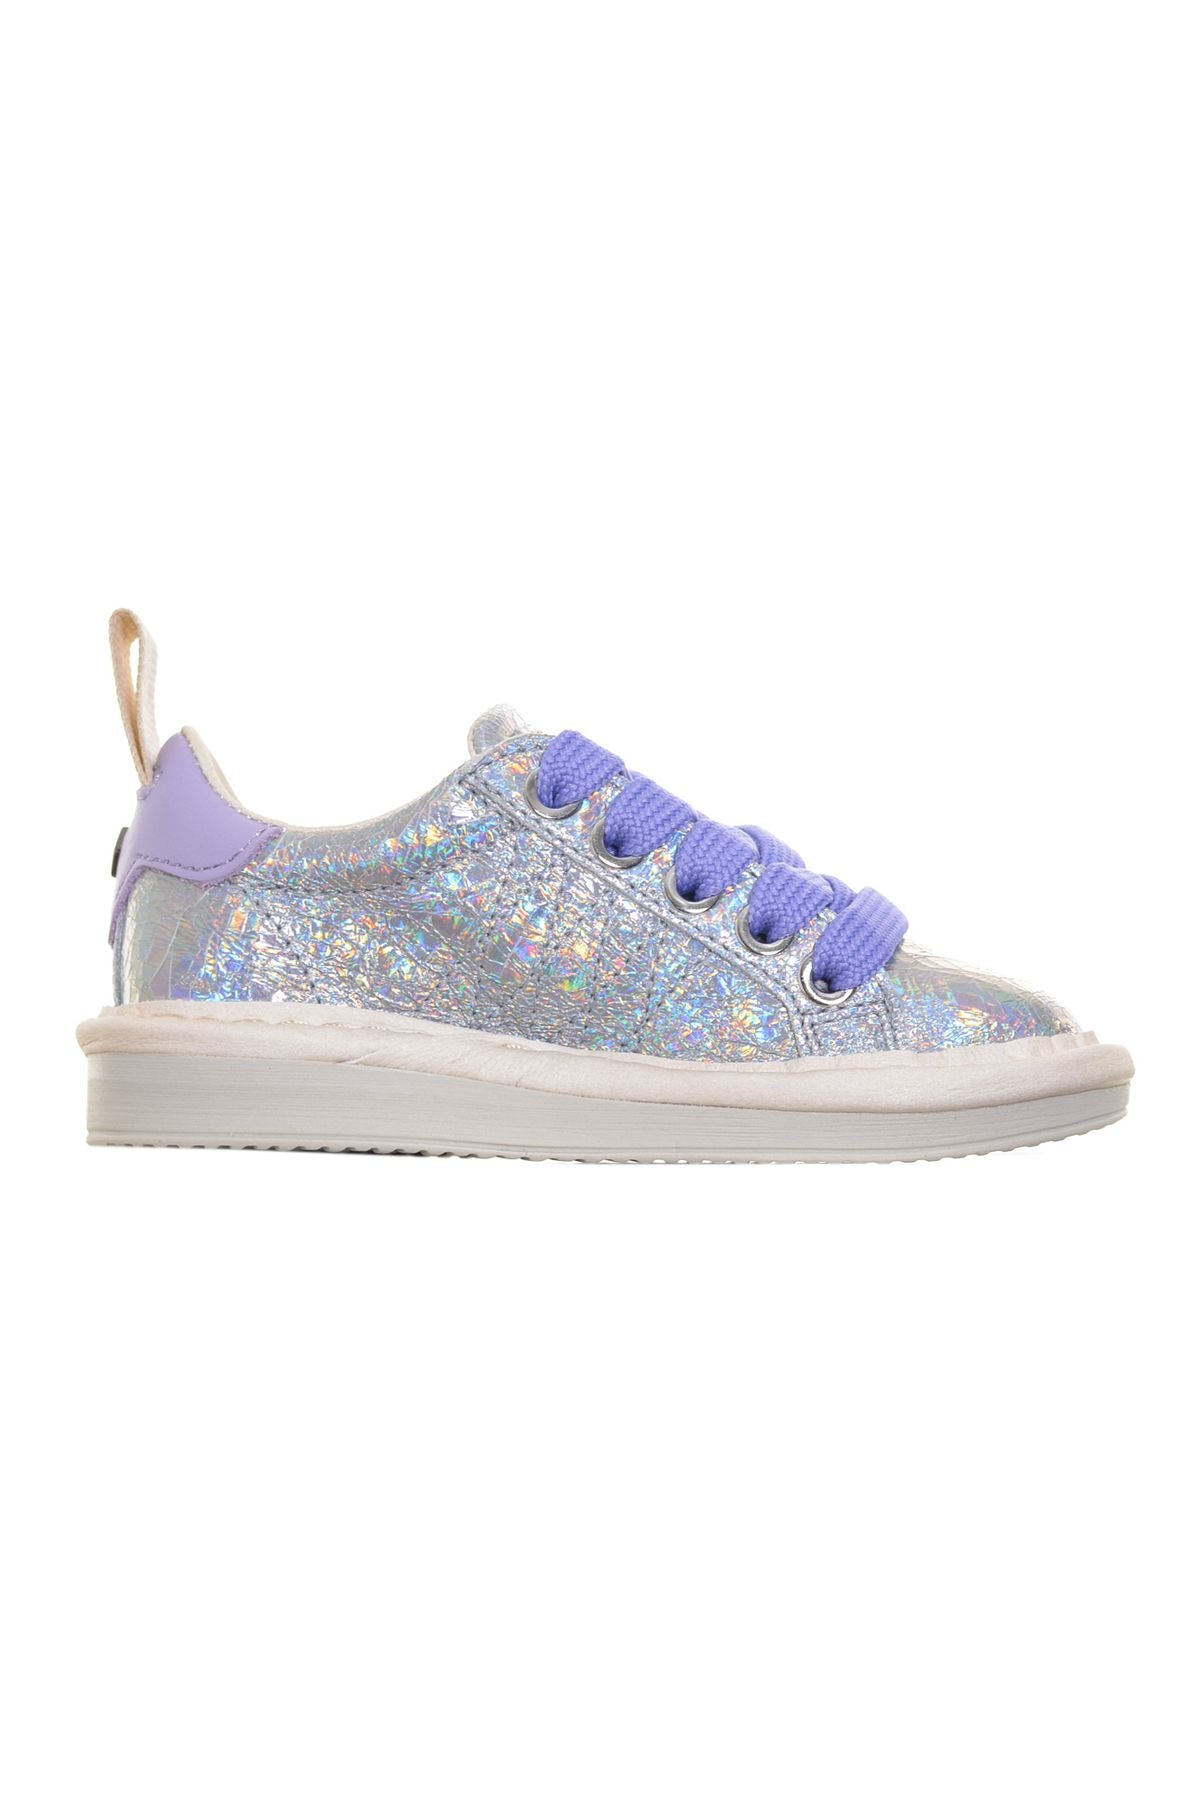 PANCHIC Spring/Summer Leather Sneakers